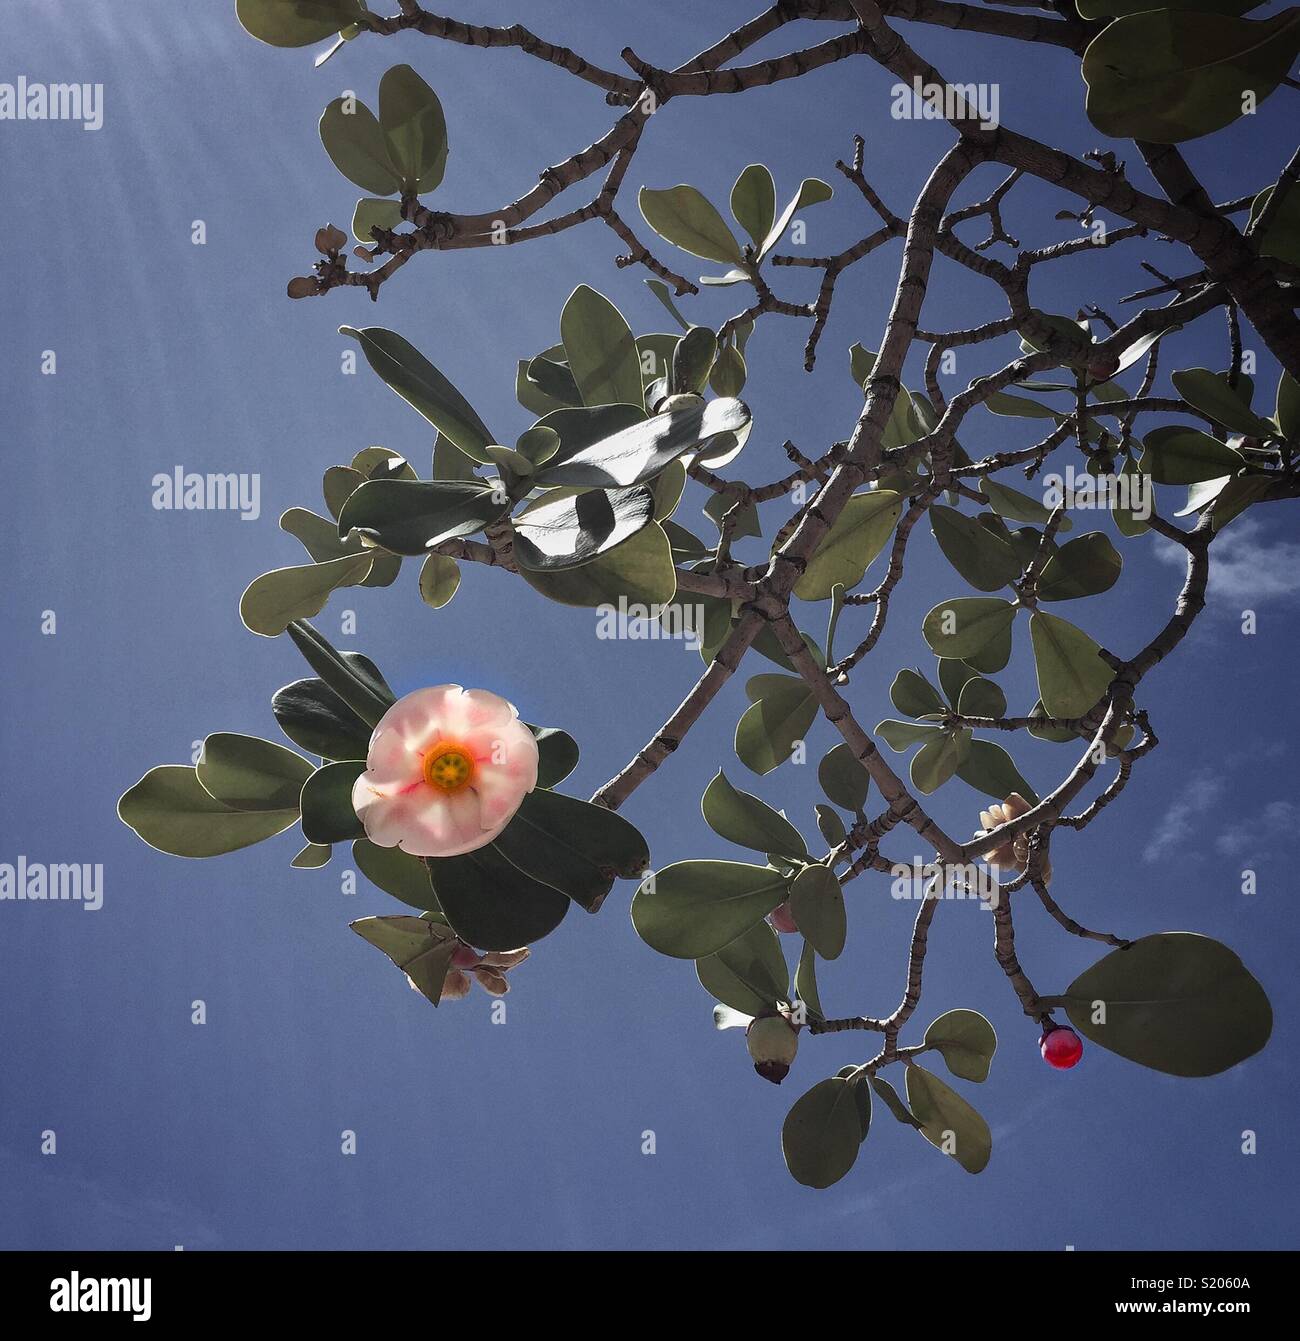 Clusia rosea, or Autograph tree, branches, fruit and pink blossom against a blue sky Stock Photo